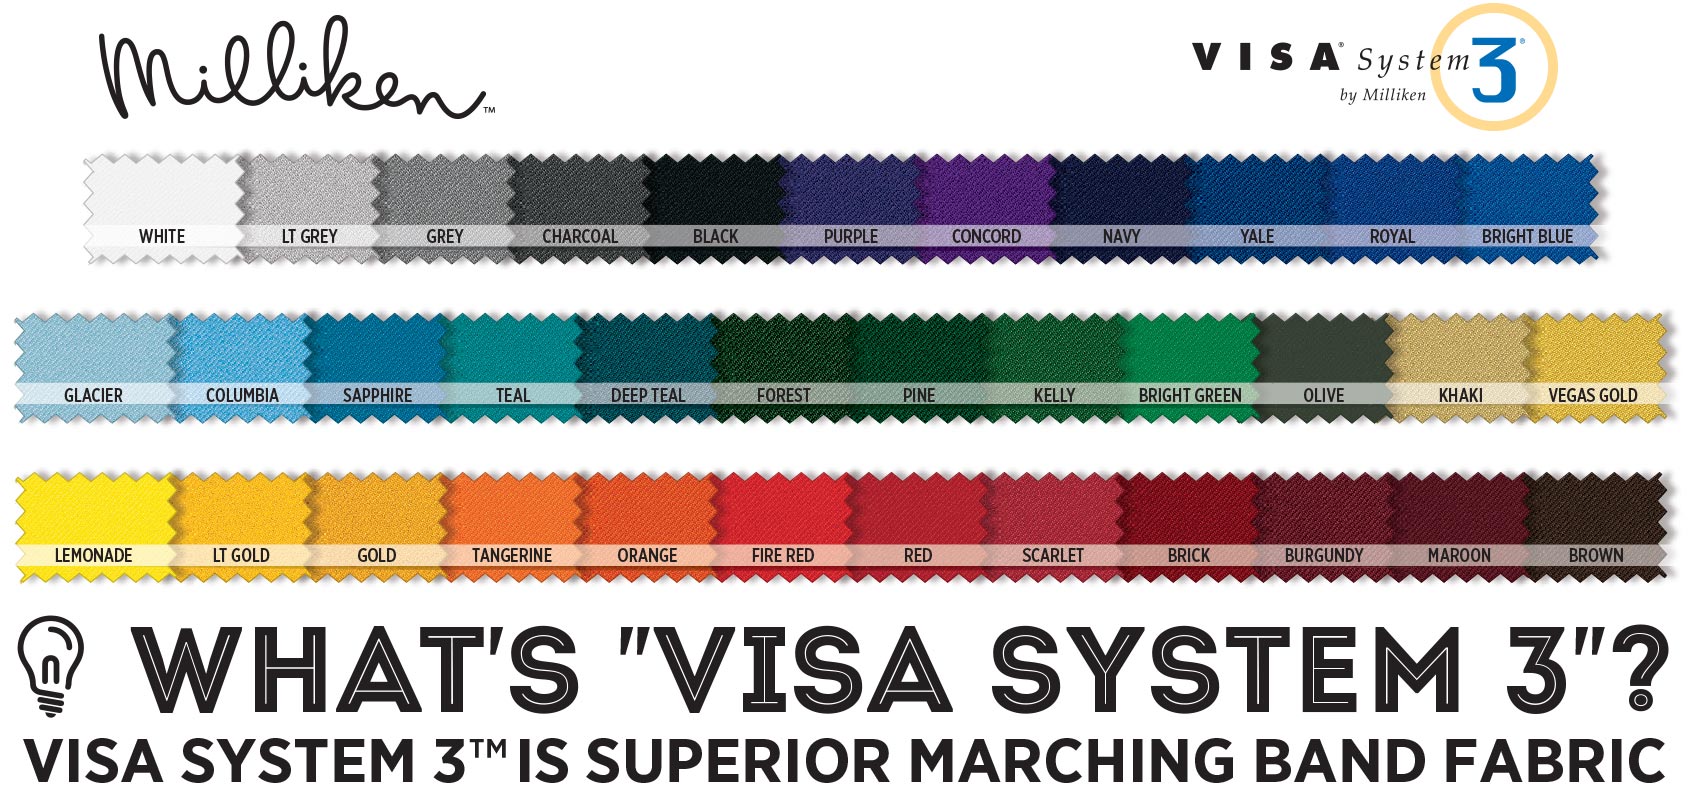 VISA System 3 color swatches -- for assistance contact our sales team